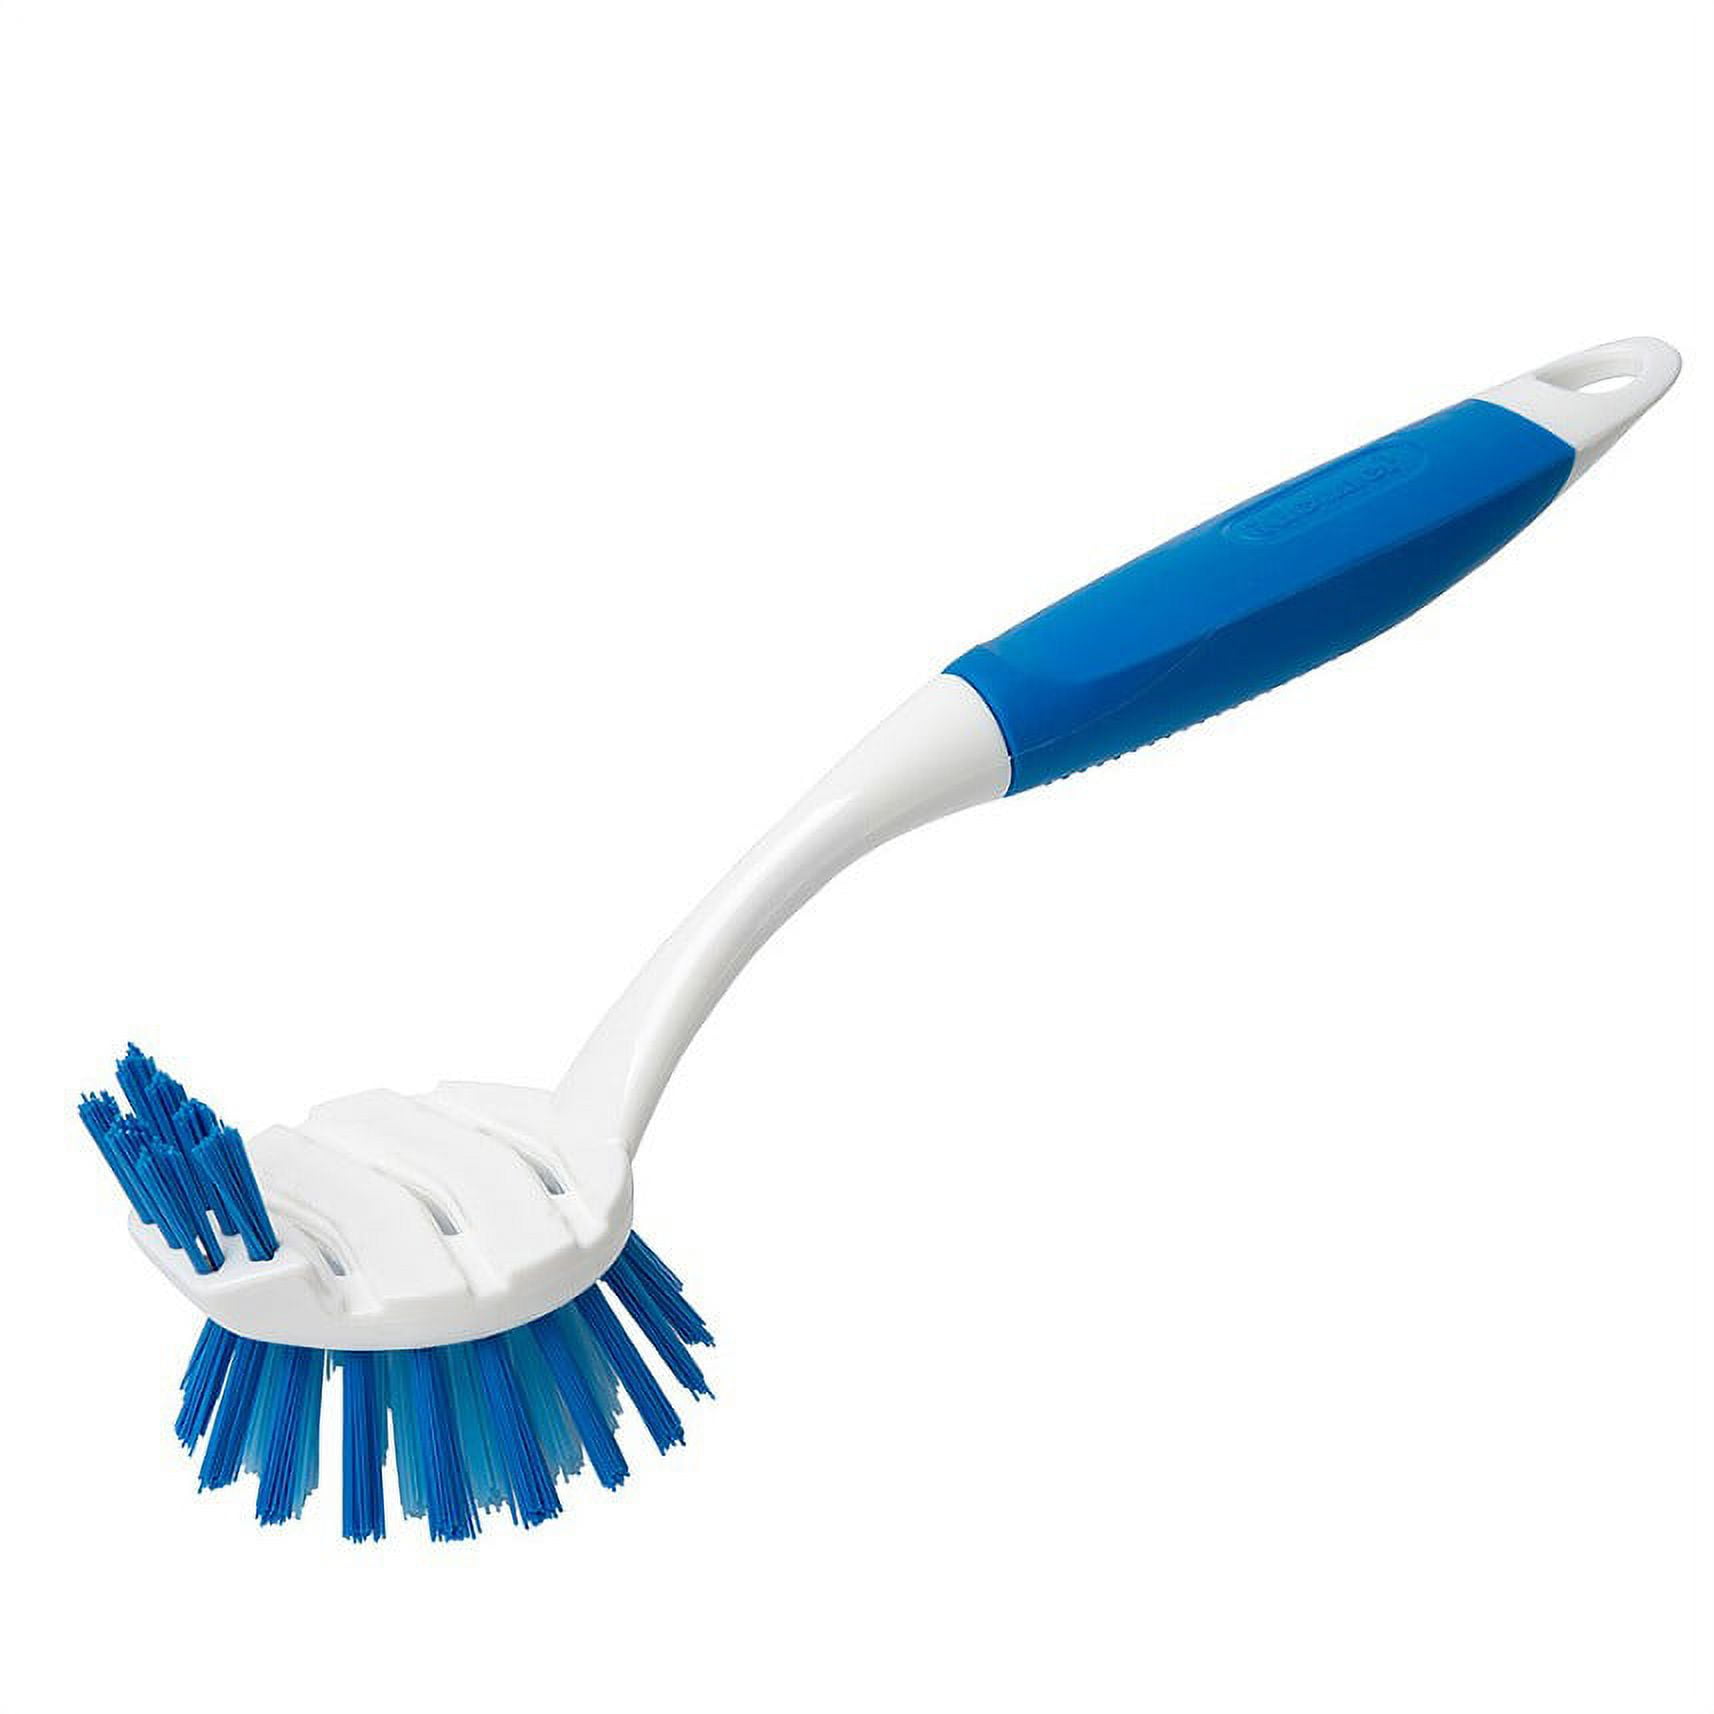 Kitchen Diffusion Type Scrub Brush for Cleaning Dishes Pots Pan Sink and Bathroom with Comfortable Long Handle, Men's, Size: One Size